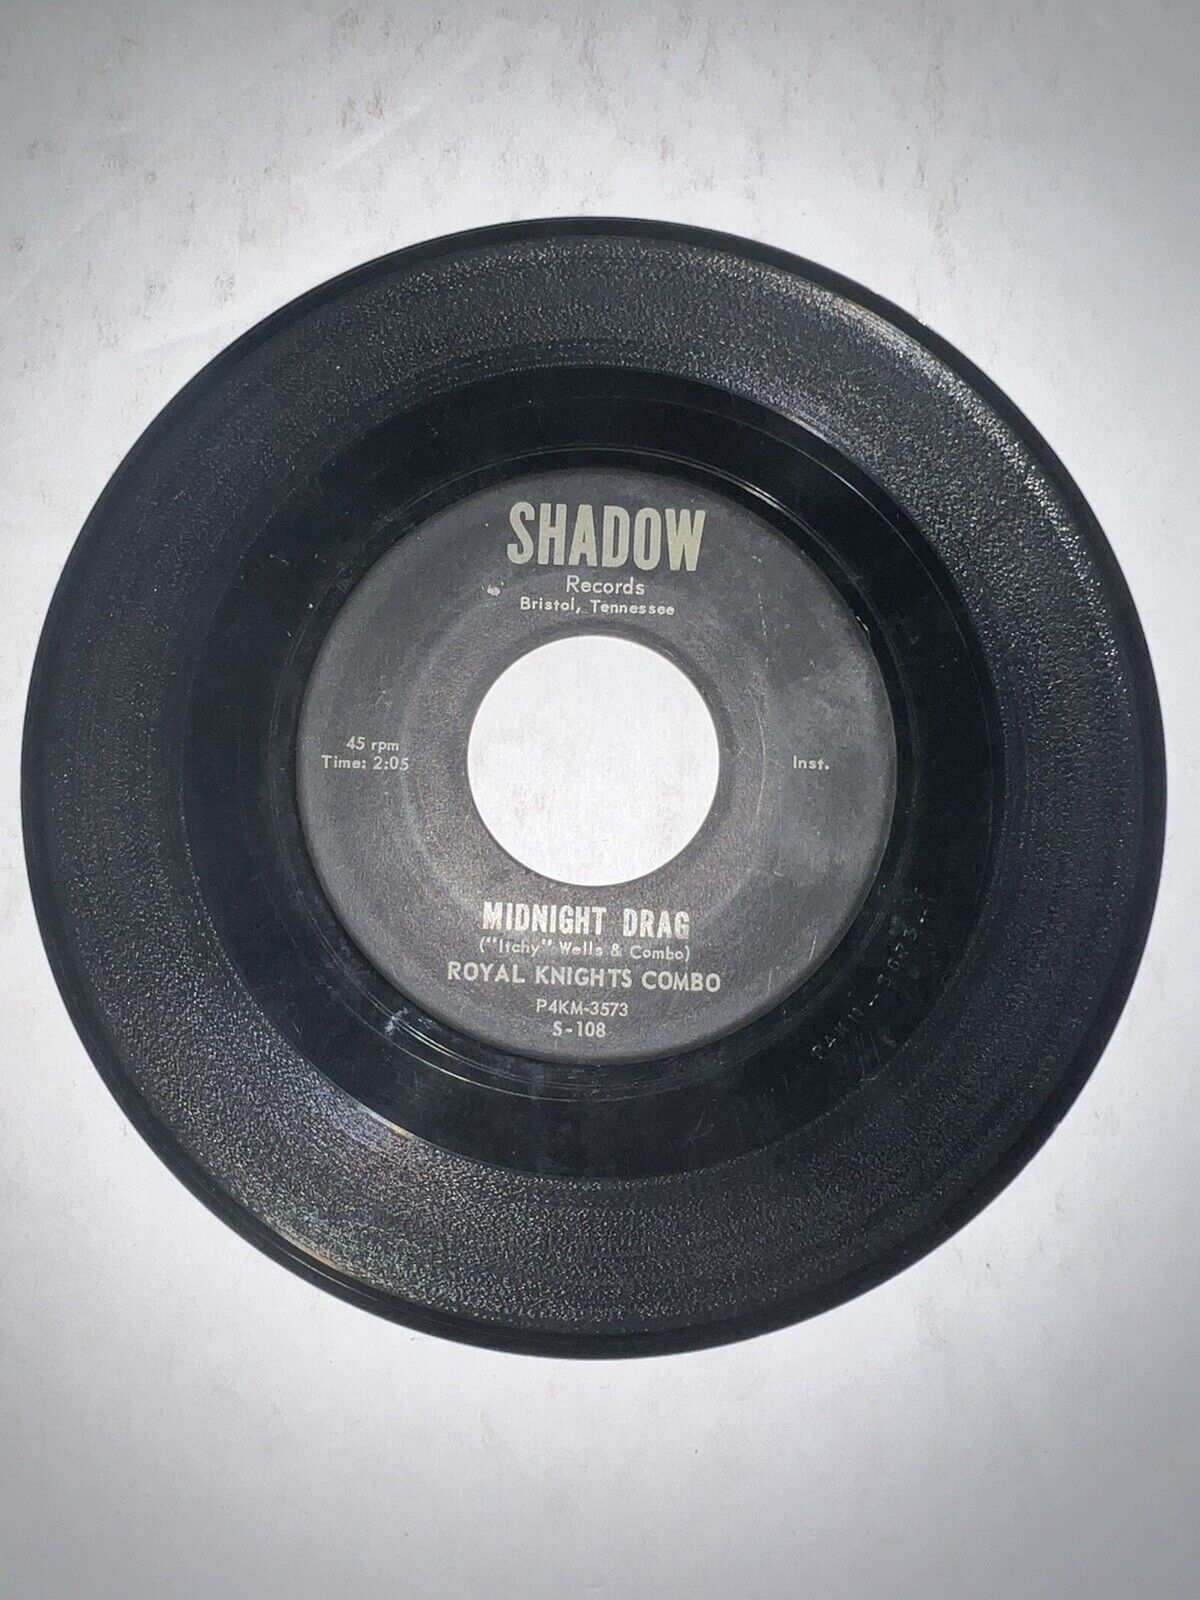 Hear! Royal Knights Combo - Midnight Drag / Don’t Cry Too Late 1963 Rare 45rpm